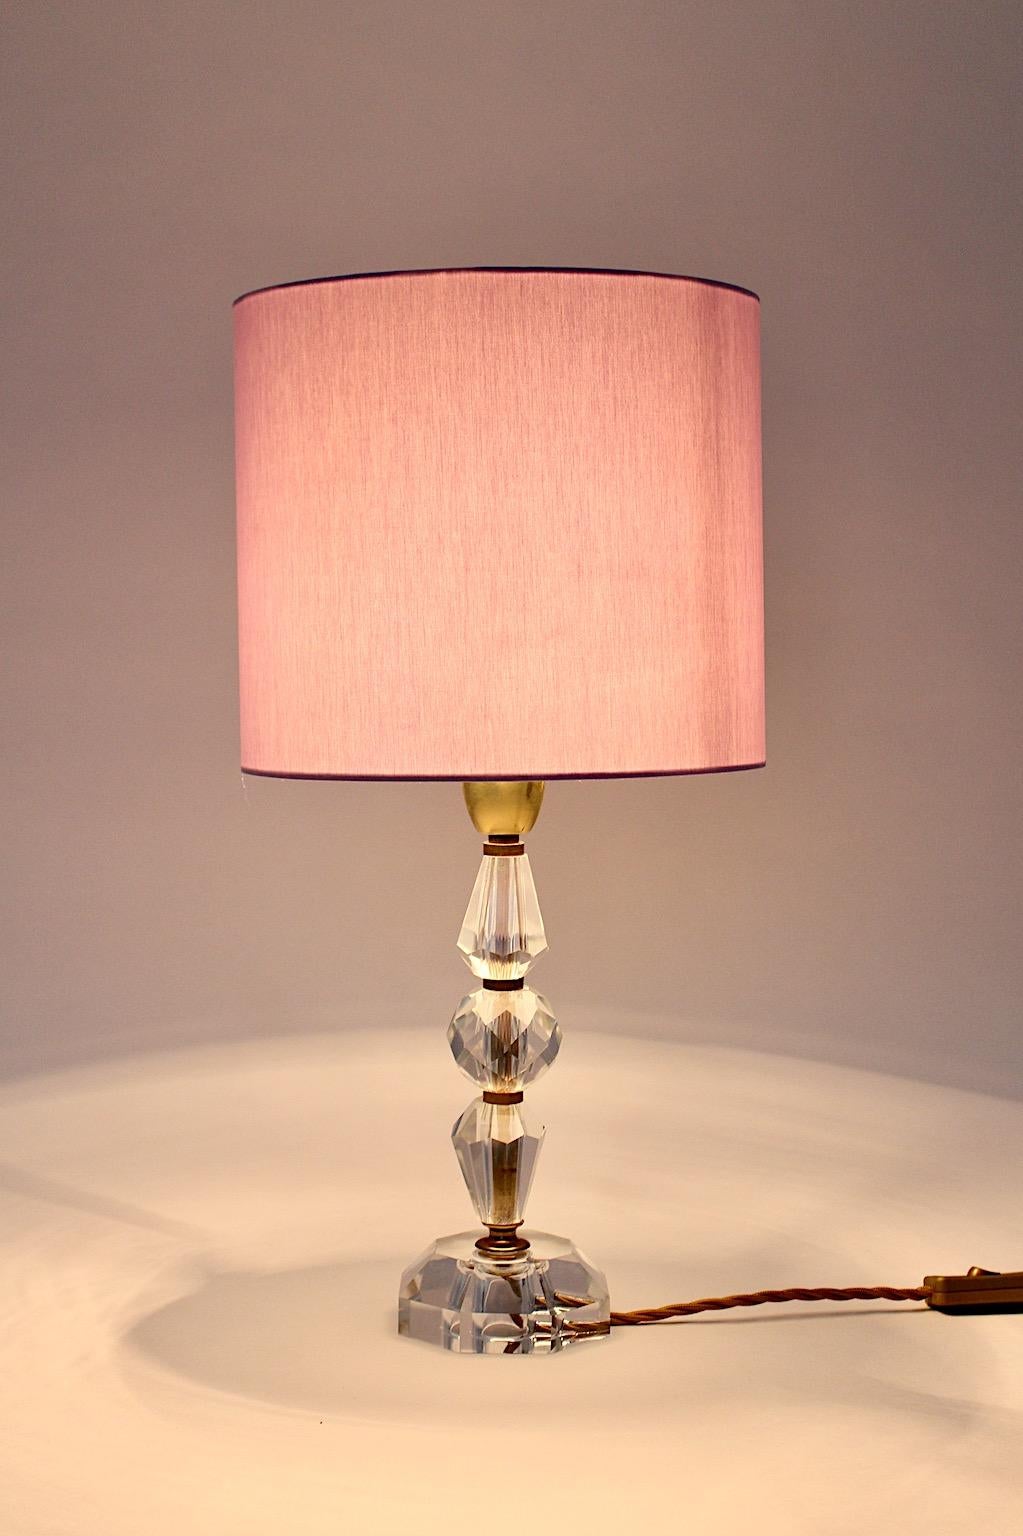 Mid Century Modern vintage table lamp from polished clear crystal glass and soft lavender lamp shade from textile fabric by Bakalowits 1950s Vienna.
While the base is build of brass details and polished crystal glass elements in different geometric